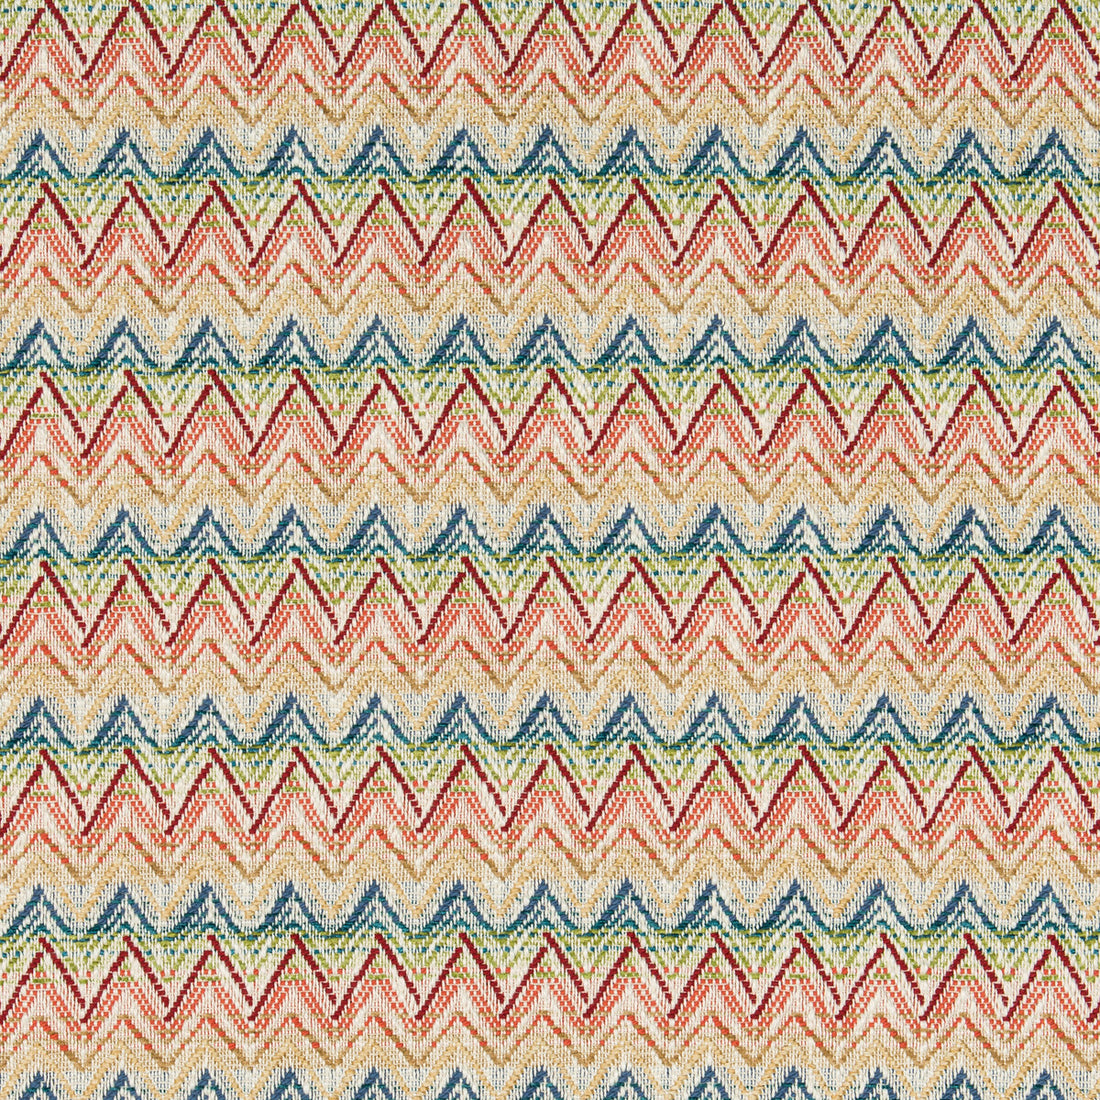 Cambrose Weave fabric in cabana color - pattern 2020107.549.0 - by Lee Jofa in the Linford Weaves collection